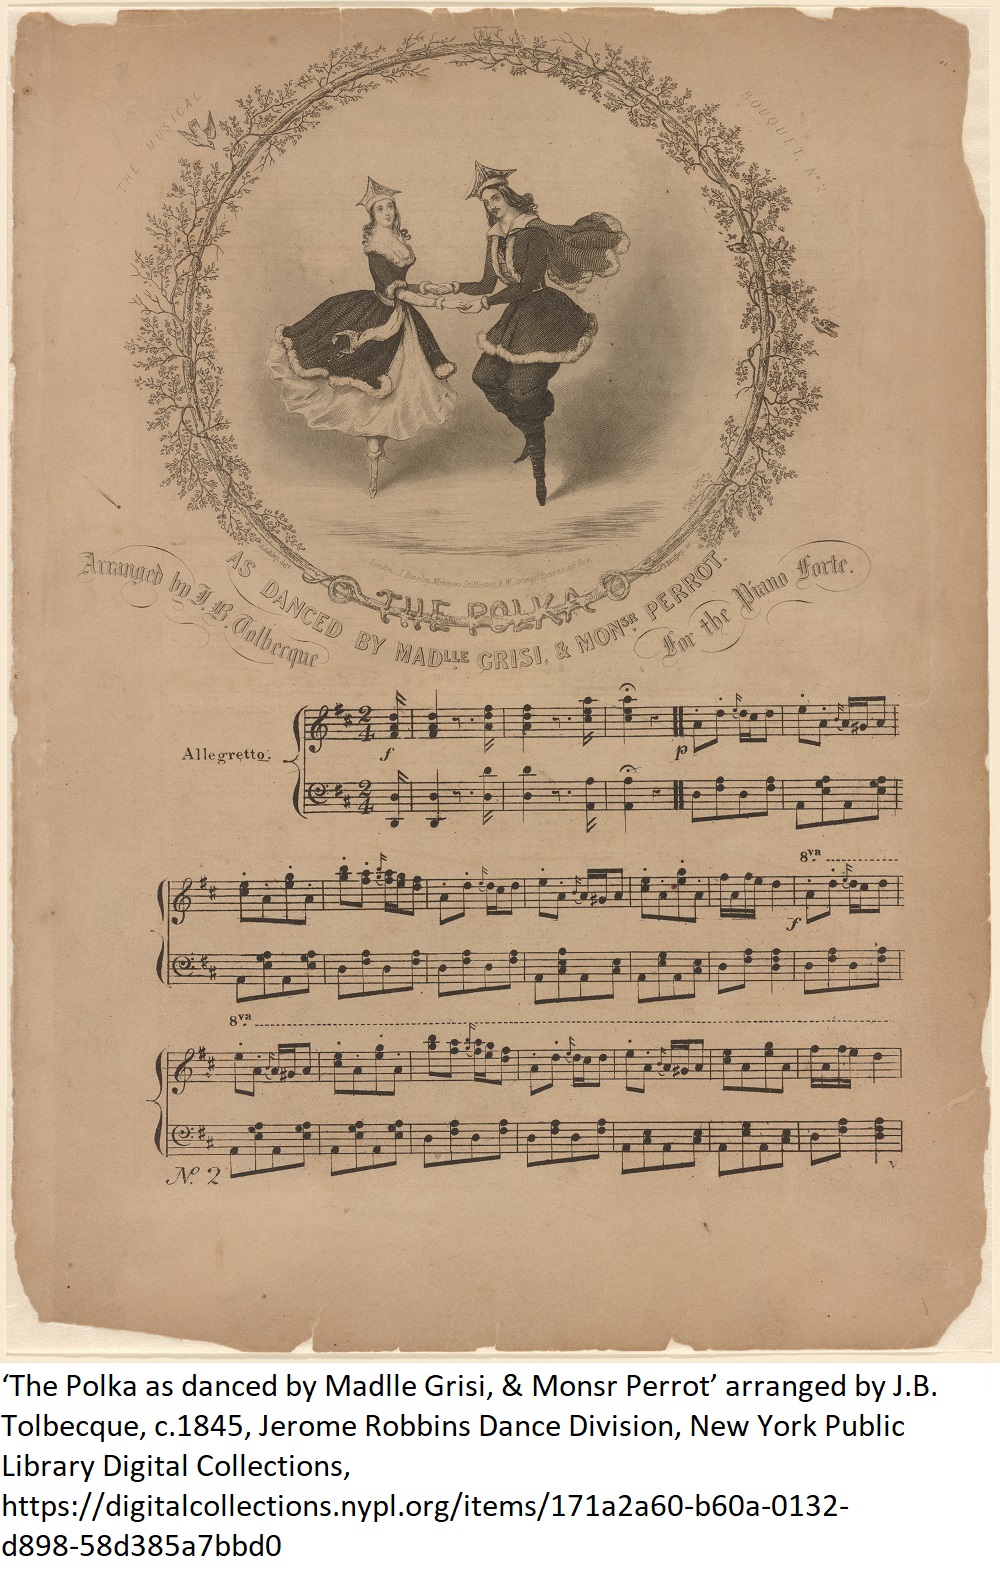 ‘The Polka as danced by Madlle Grisi, & Monsr Perrot’ arranged by J.B. Tolbecque, c.1845, Jerome Robbins Dance Division, New York Public Library Digital Collections, https://digitalcollections.nypl.org/items/171a2a60-b60a-0132-d898-58d385a7bbd0 